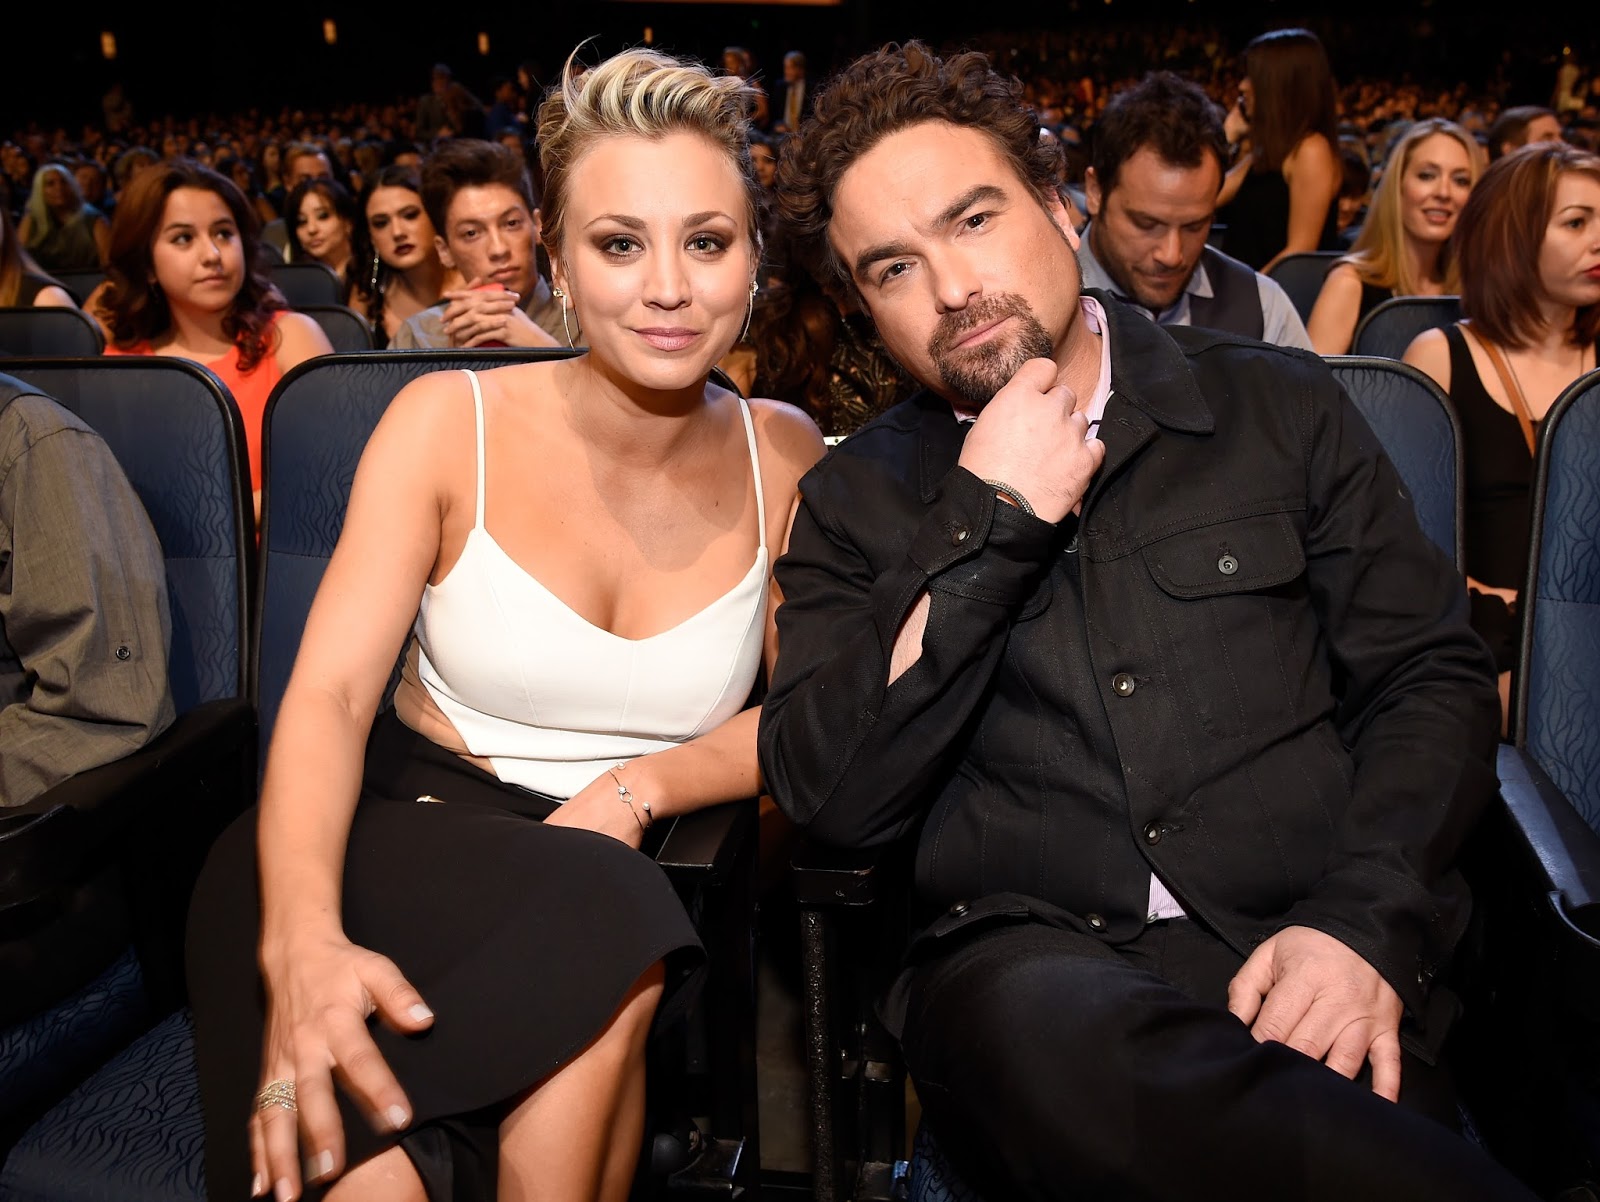 Celebrity World: Daring Kaley Cuoco teases fans exposing entire breast on  Snapchat